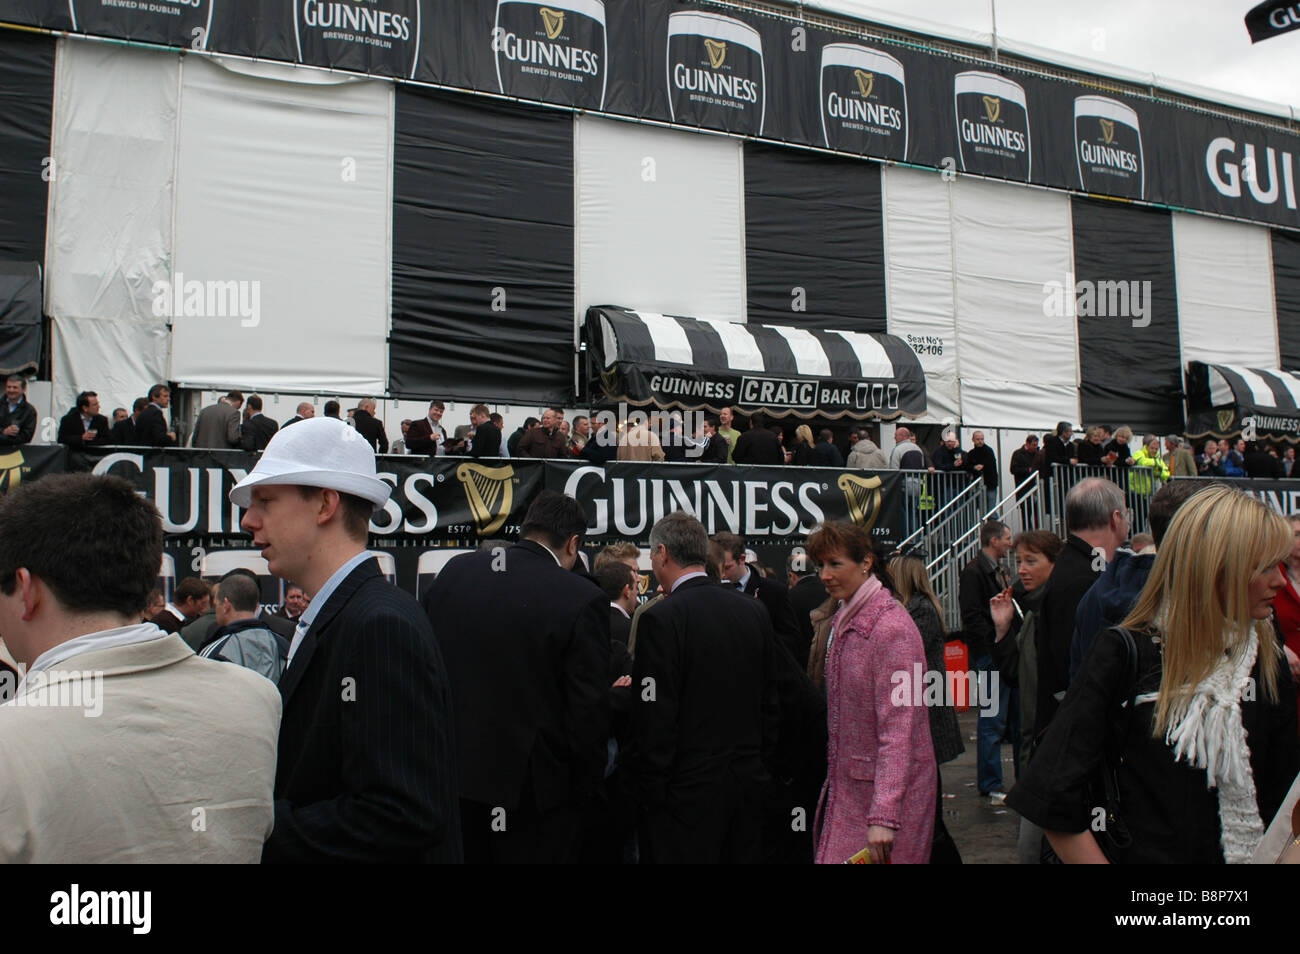 Cheltenham Gold Cup Guinness Village, crowded fans drinking amongst the flags Craic Bar Stock Photo